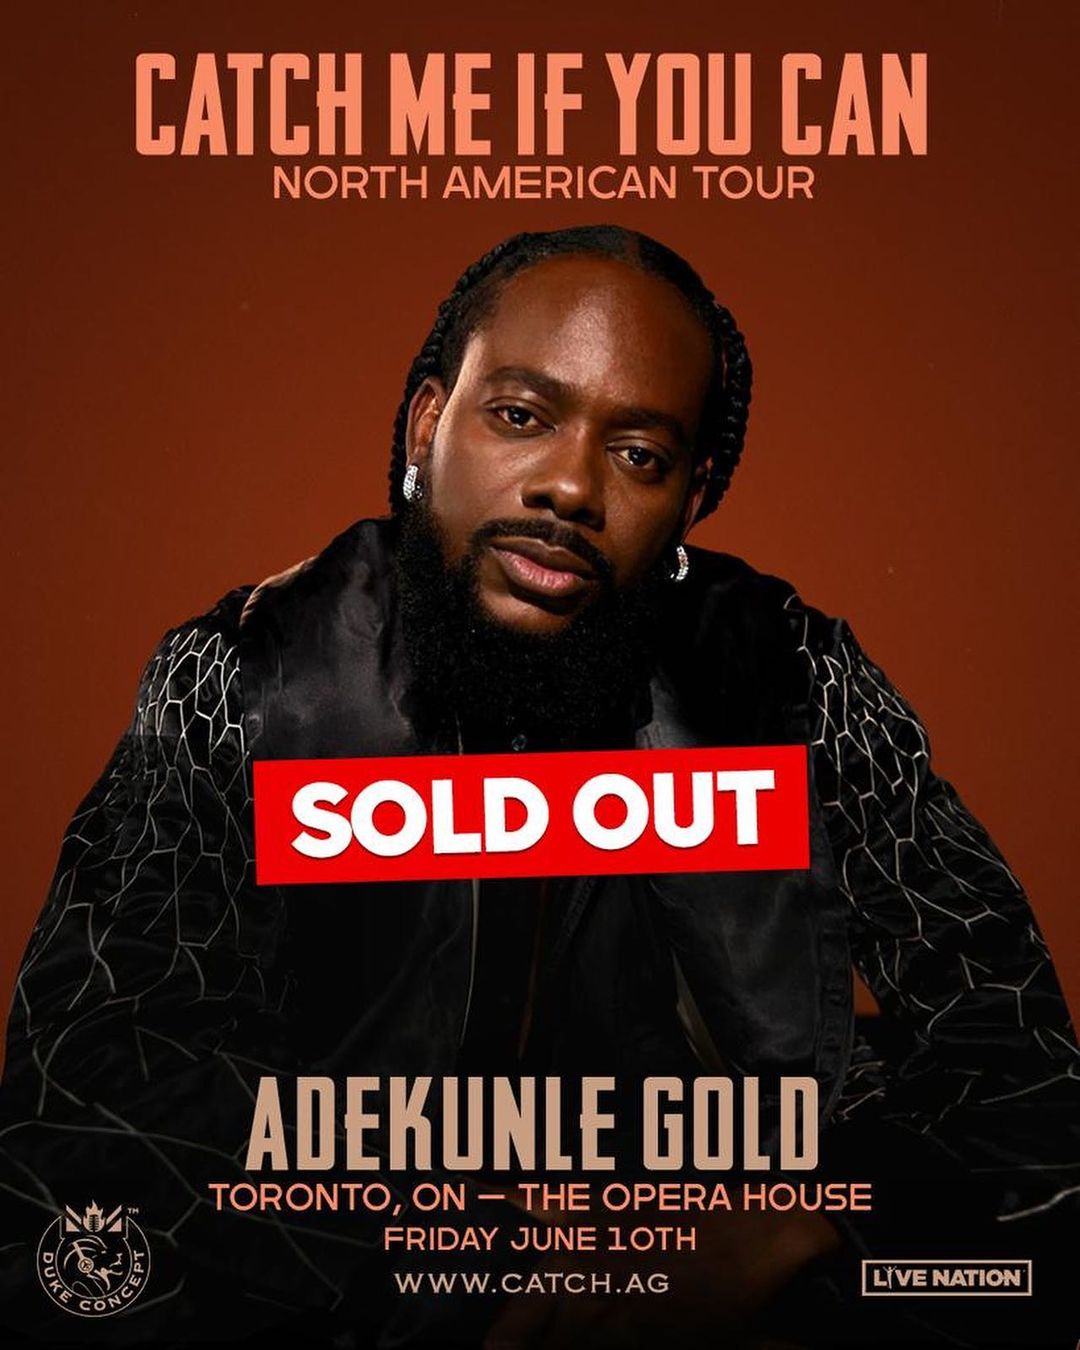 Adekunle Gold Sells Out Toronto Tickets Ahead Of Concert